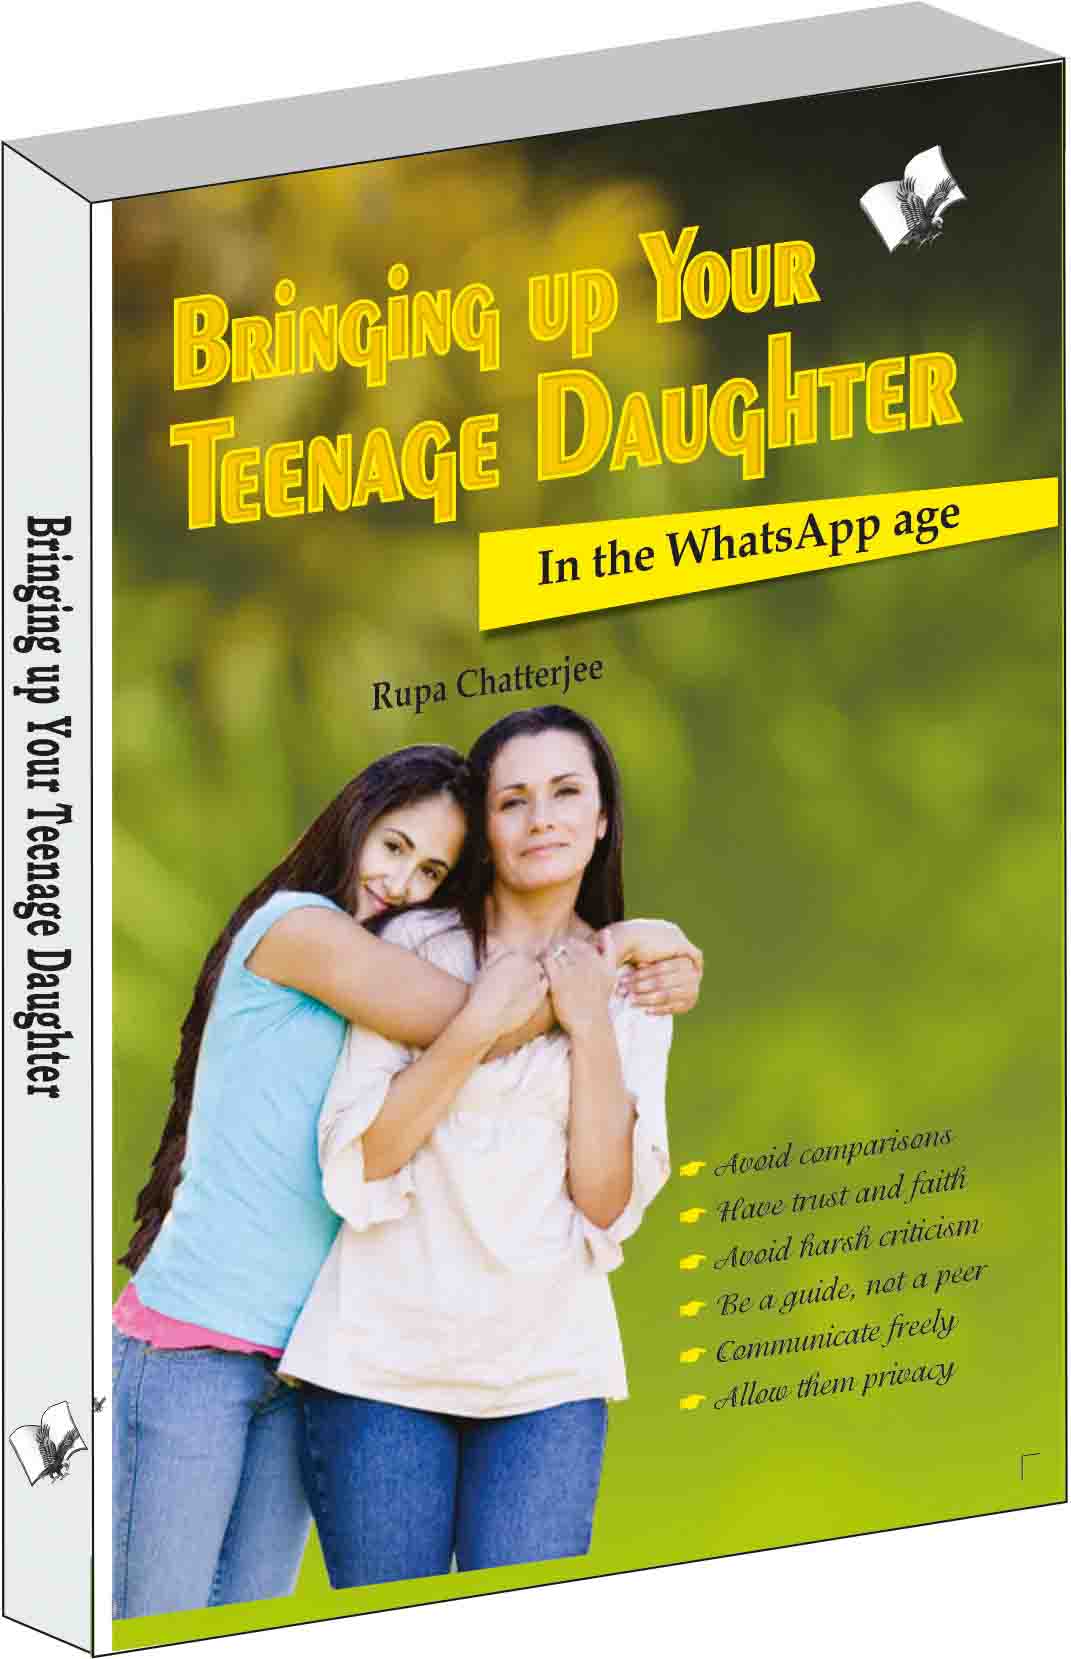 Bringing up your Teenage Daughter-In the WhatsApp Age